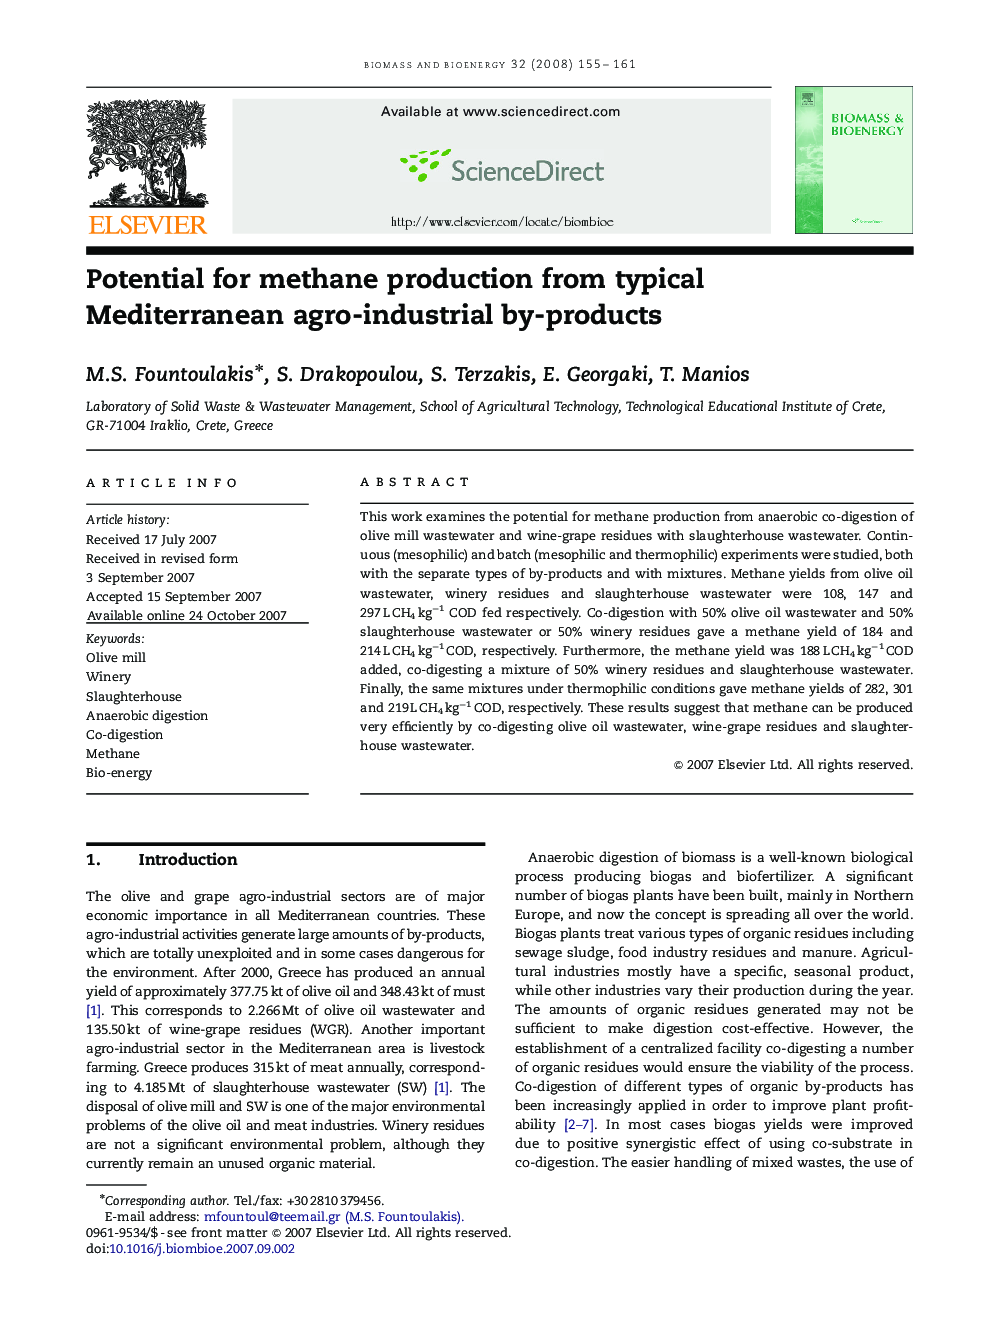 Potential for methane production from typical Mediterranean agro-industrial by-products